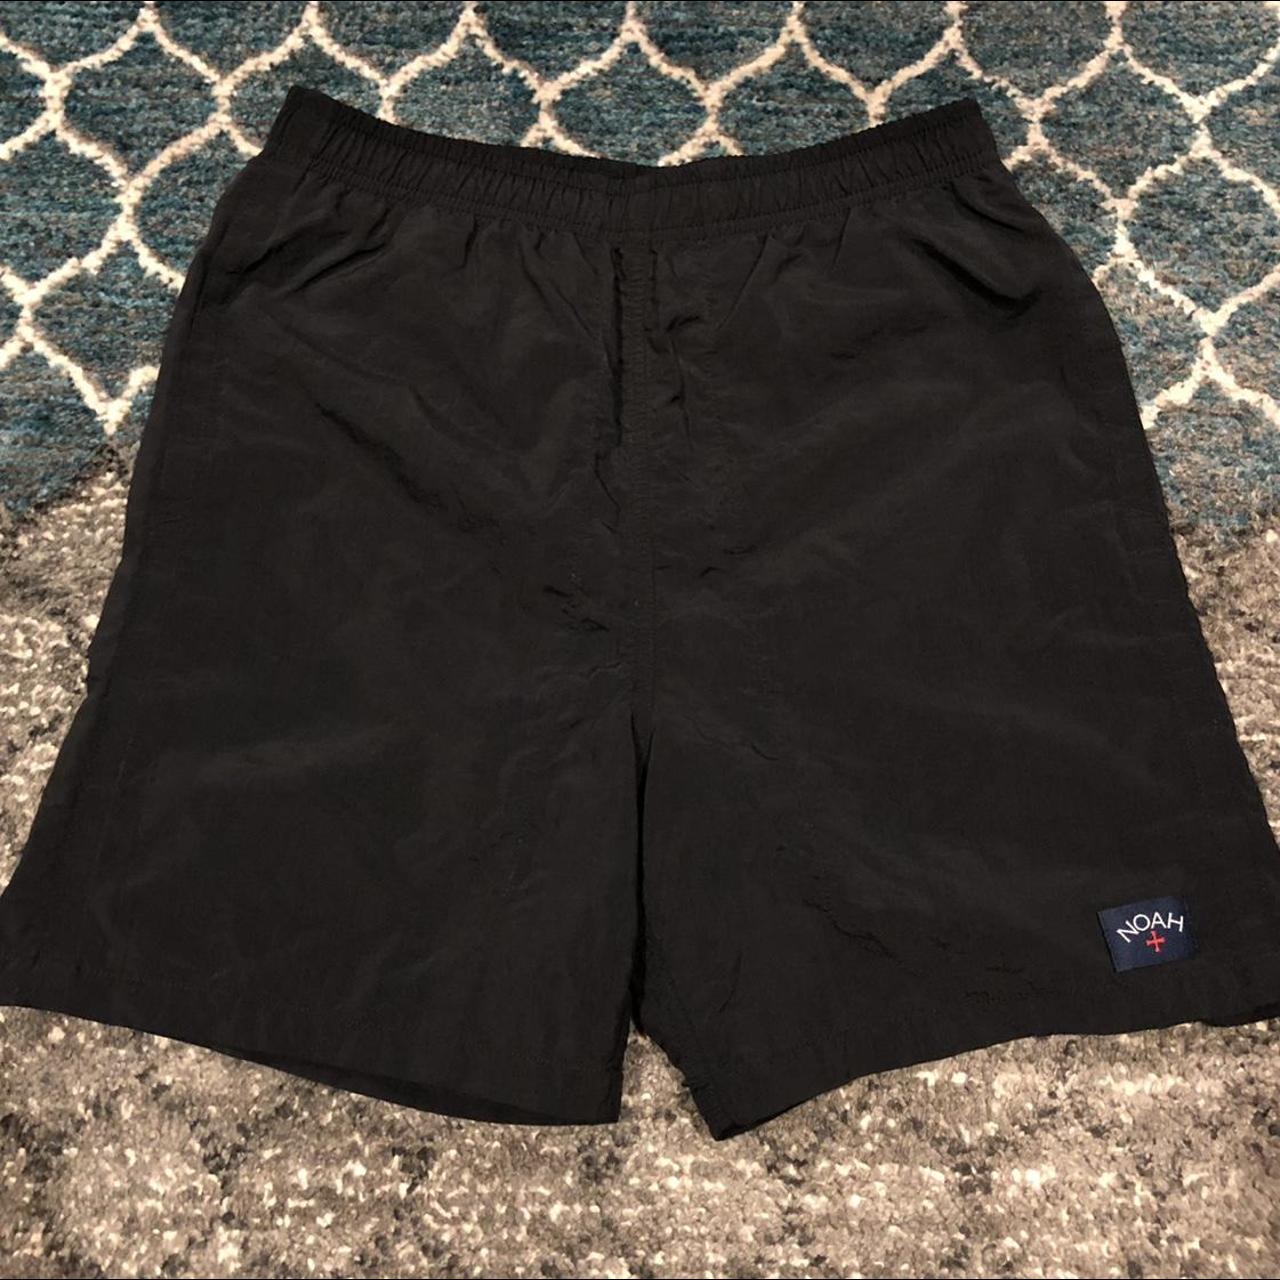 Product Image 1 - •Noah swim trunks in a